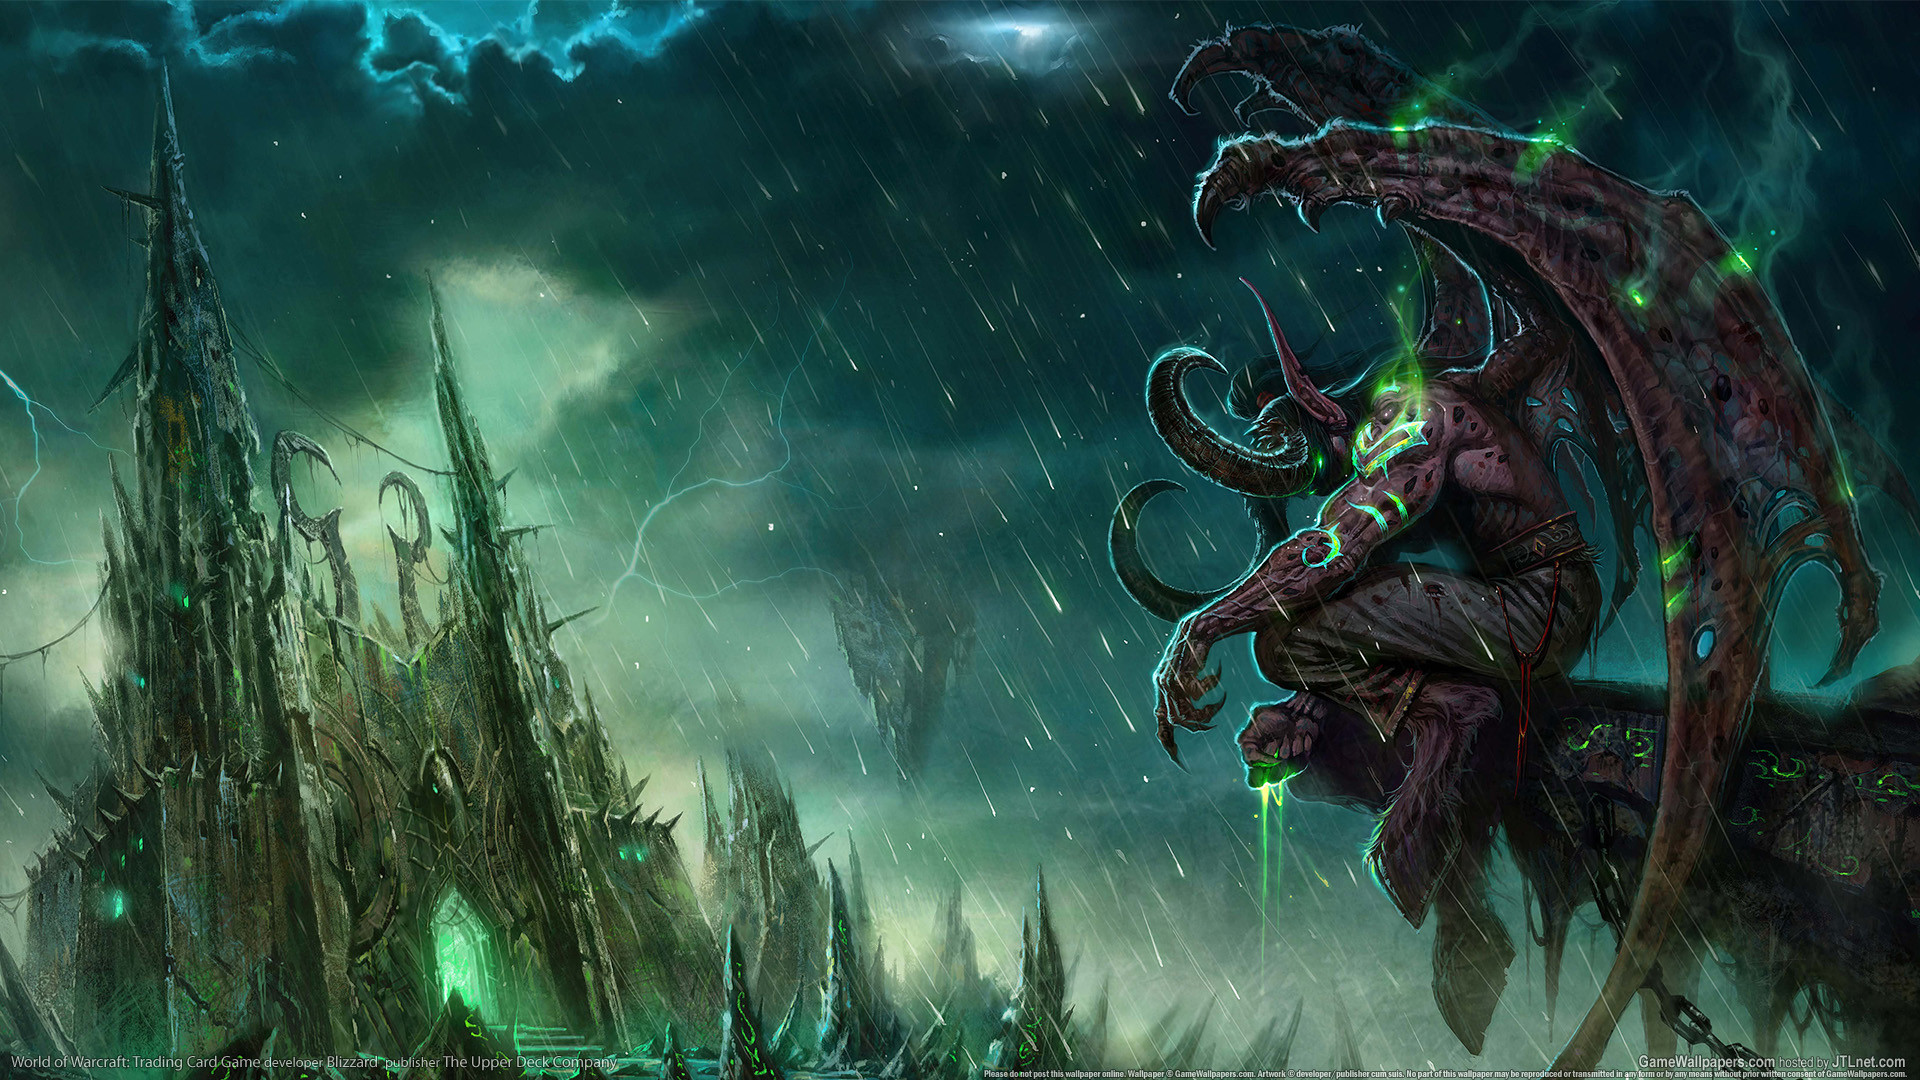 1920x1080 Explore World Of Warcraft Wallpaper and more!